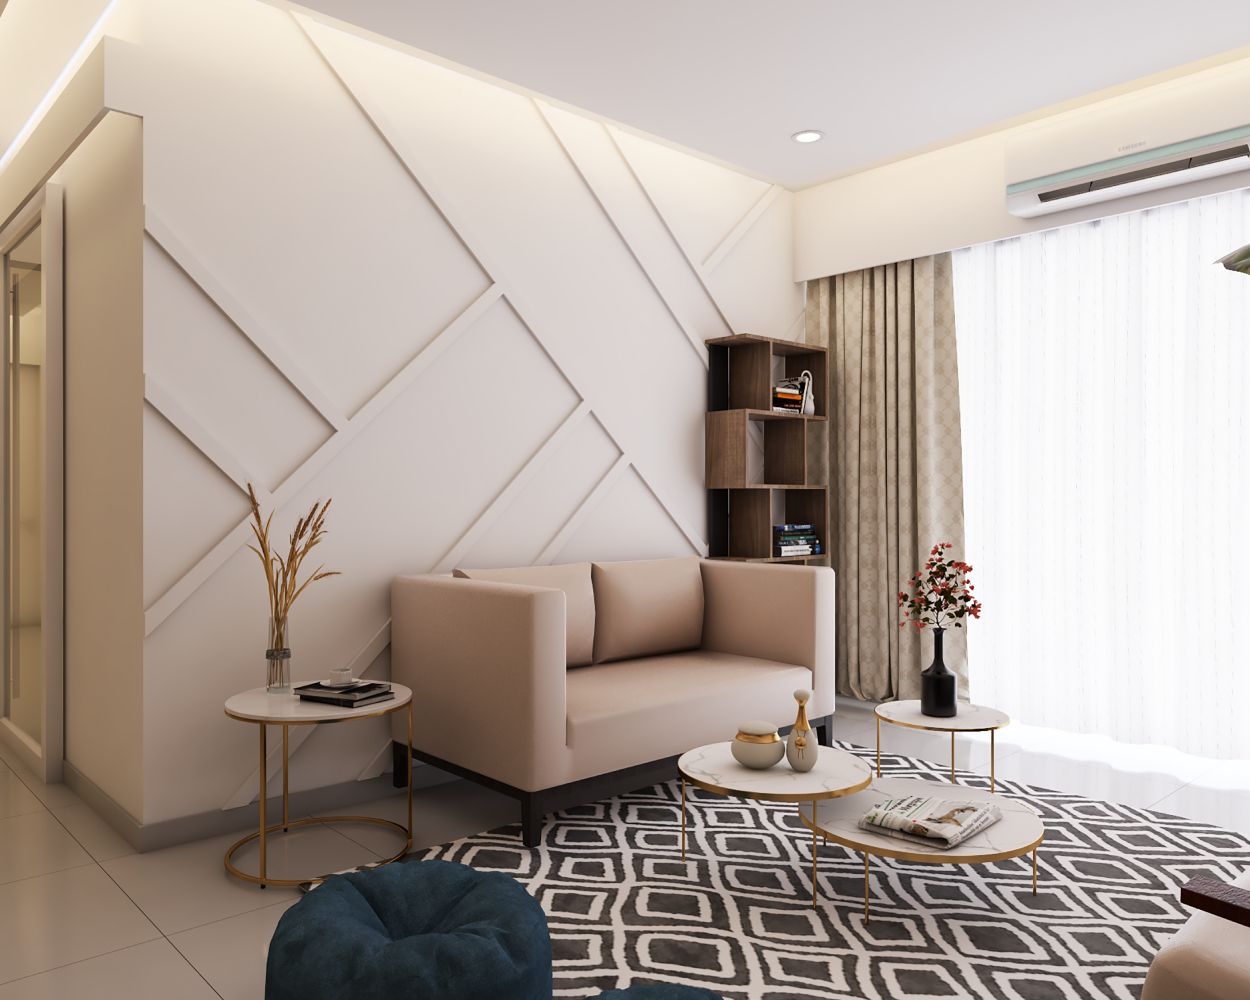 Modern White Living Room Wall Design With 3D Geometric Panelling